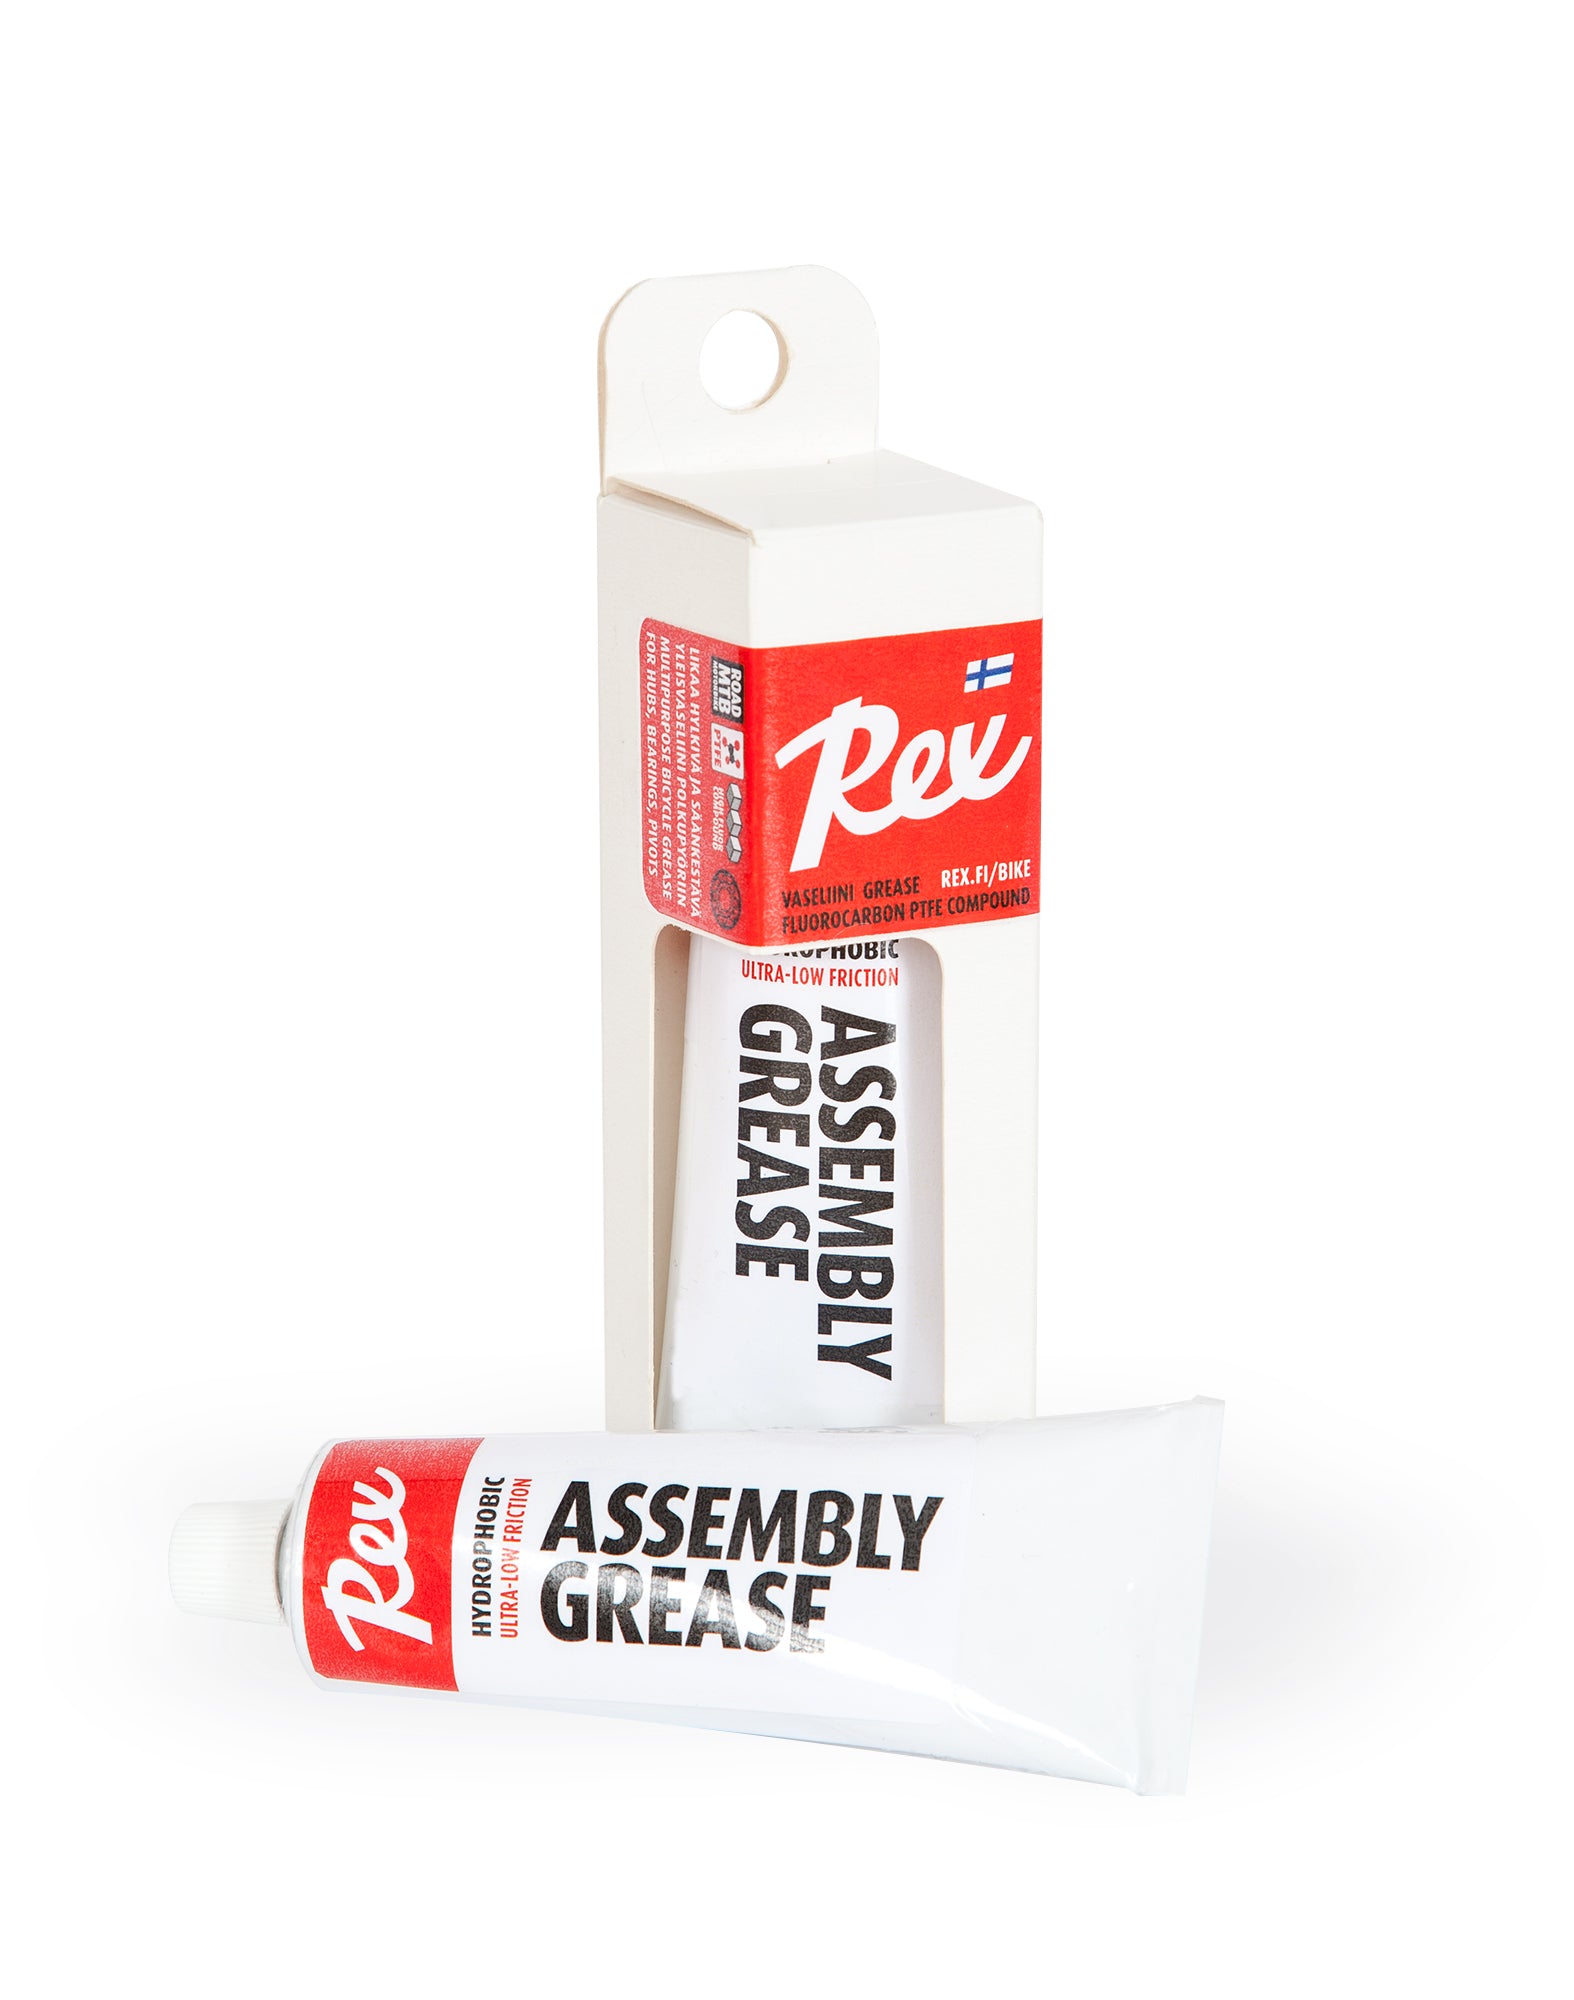 Rex 901 50g | Assembly Grease